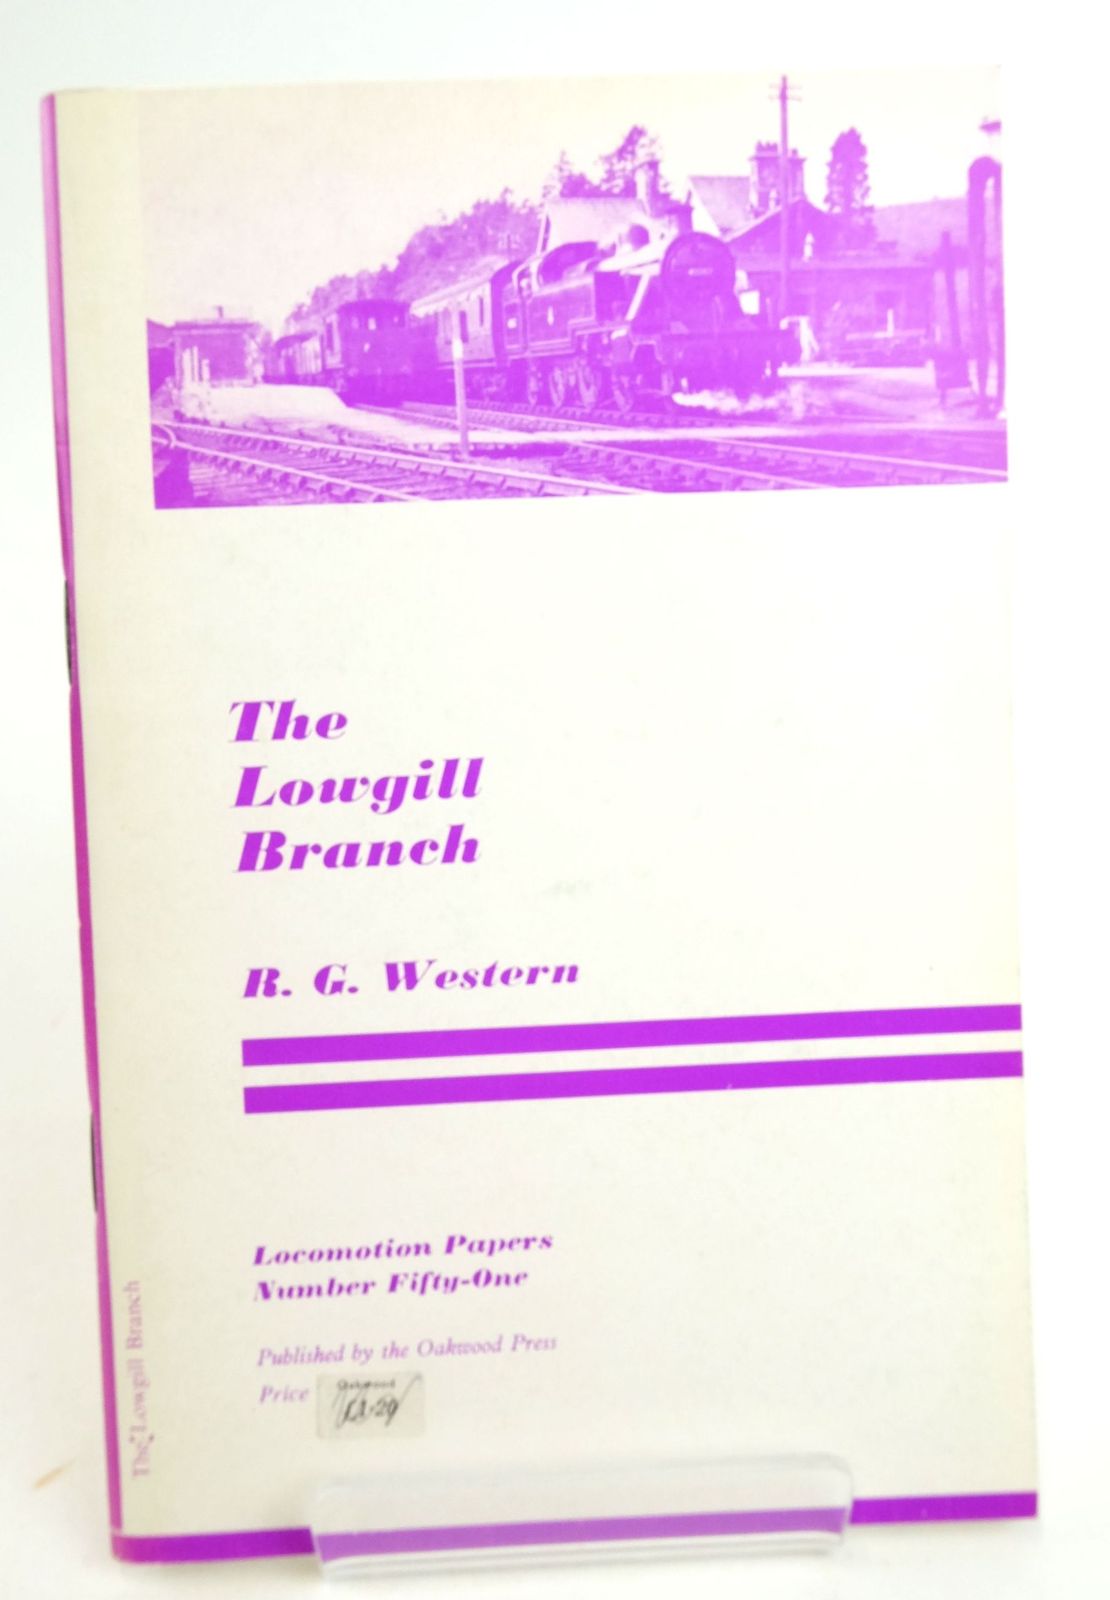 Photo of THE LOWGILL BRANCH: A LOST ROUTE TO SCOTLAND (LOCMOTION PAPERS 51) written by Western, R.G. published by The Oakwood Press (STOCK CODE: 1819967)  for sale by Stella & Rose's Books